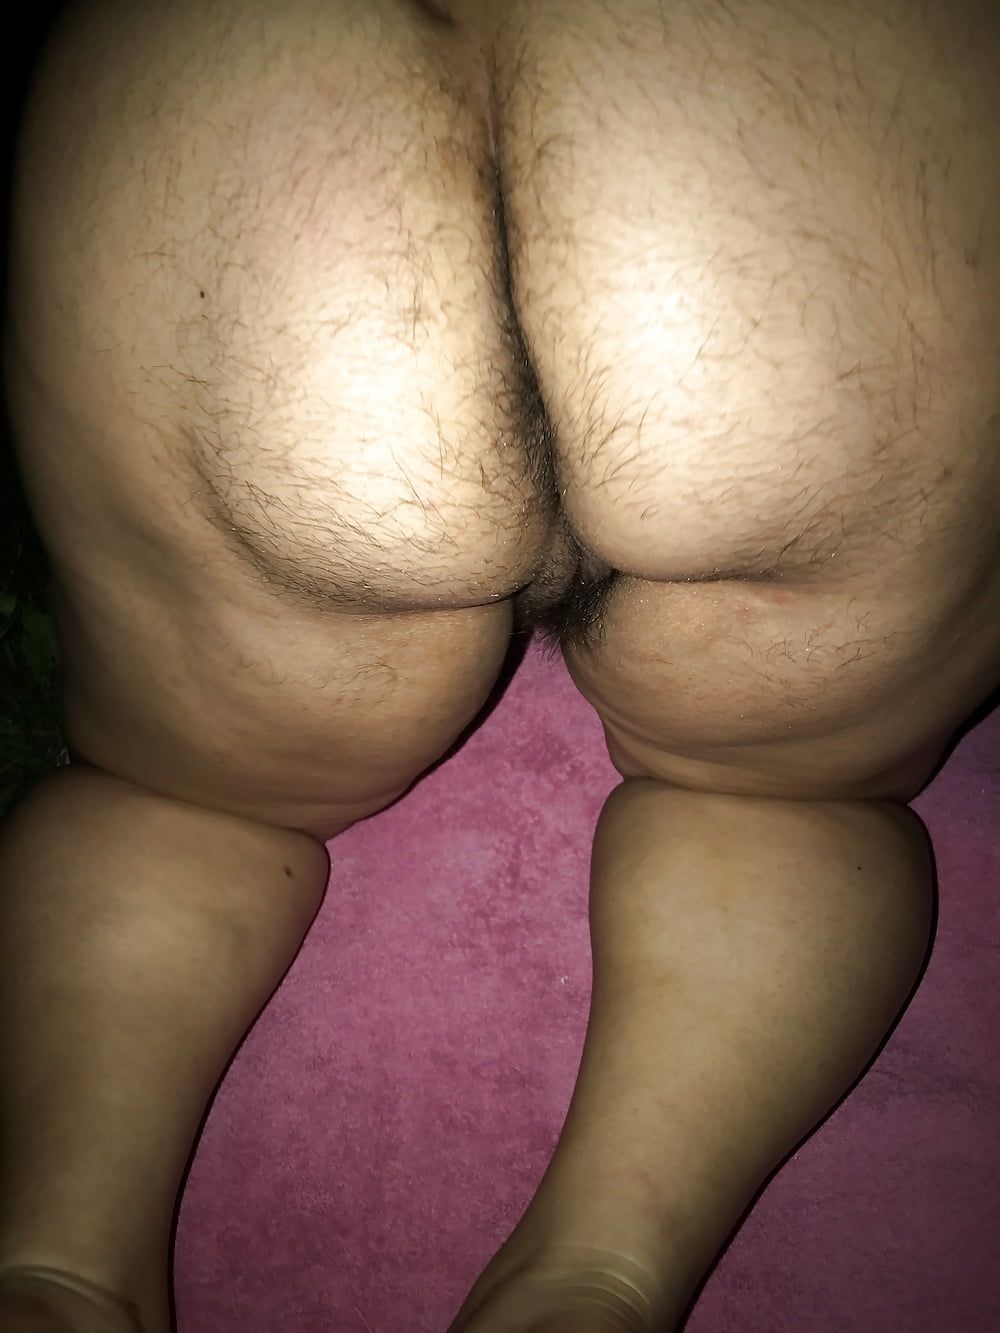 Hairy ass request 